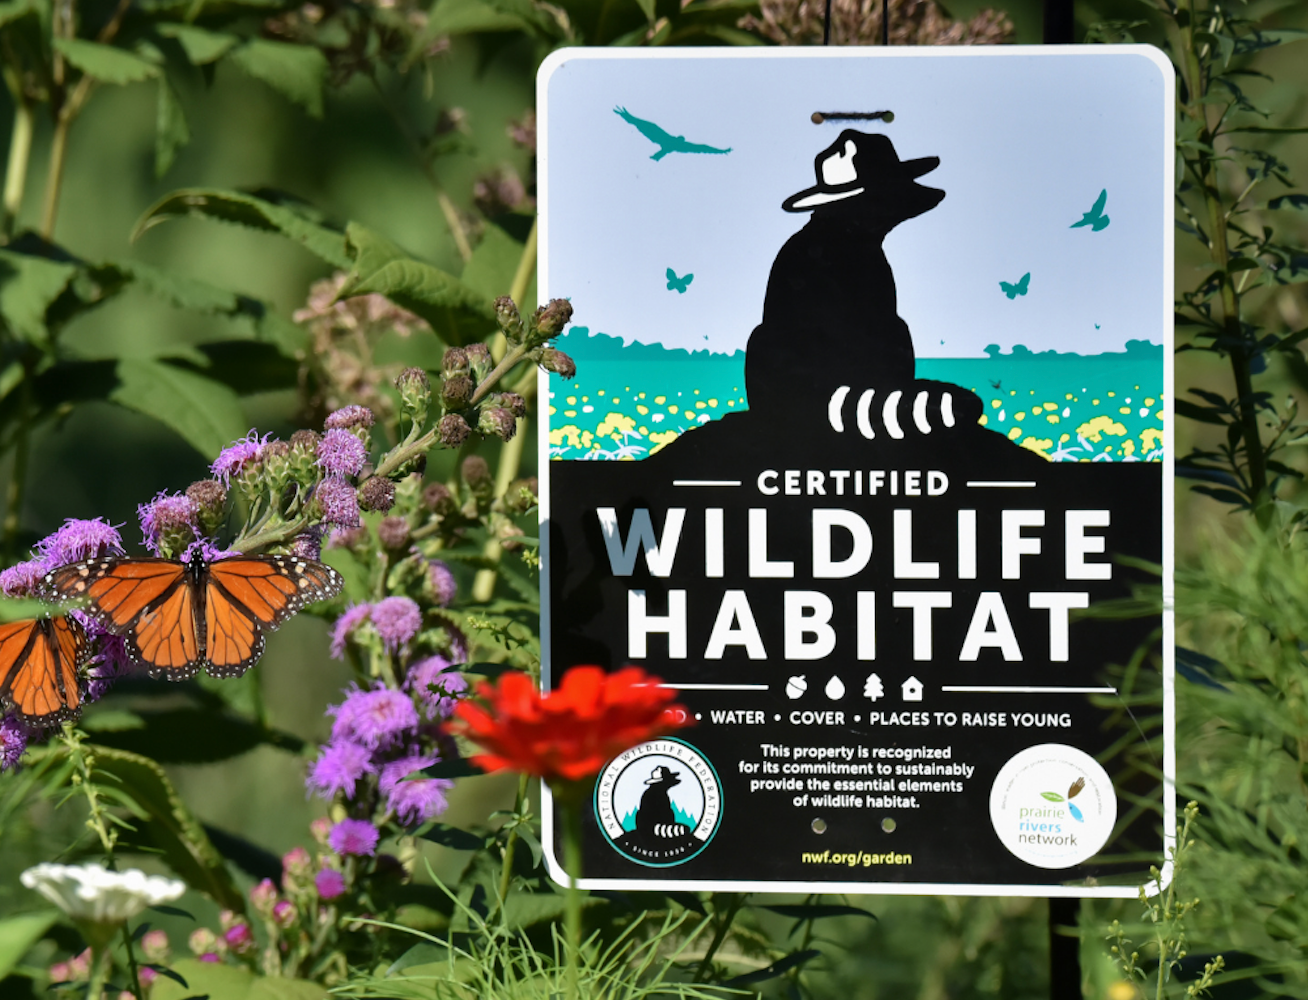 National Wildlife Federation Certified Wildlife Habitat sign with plants and monarch butterflies